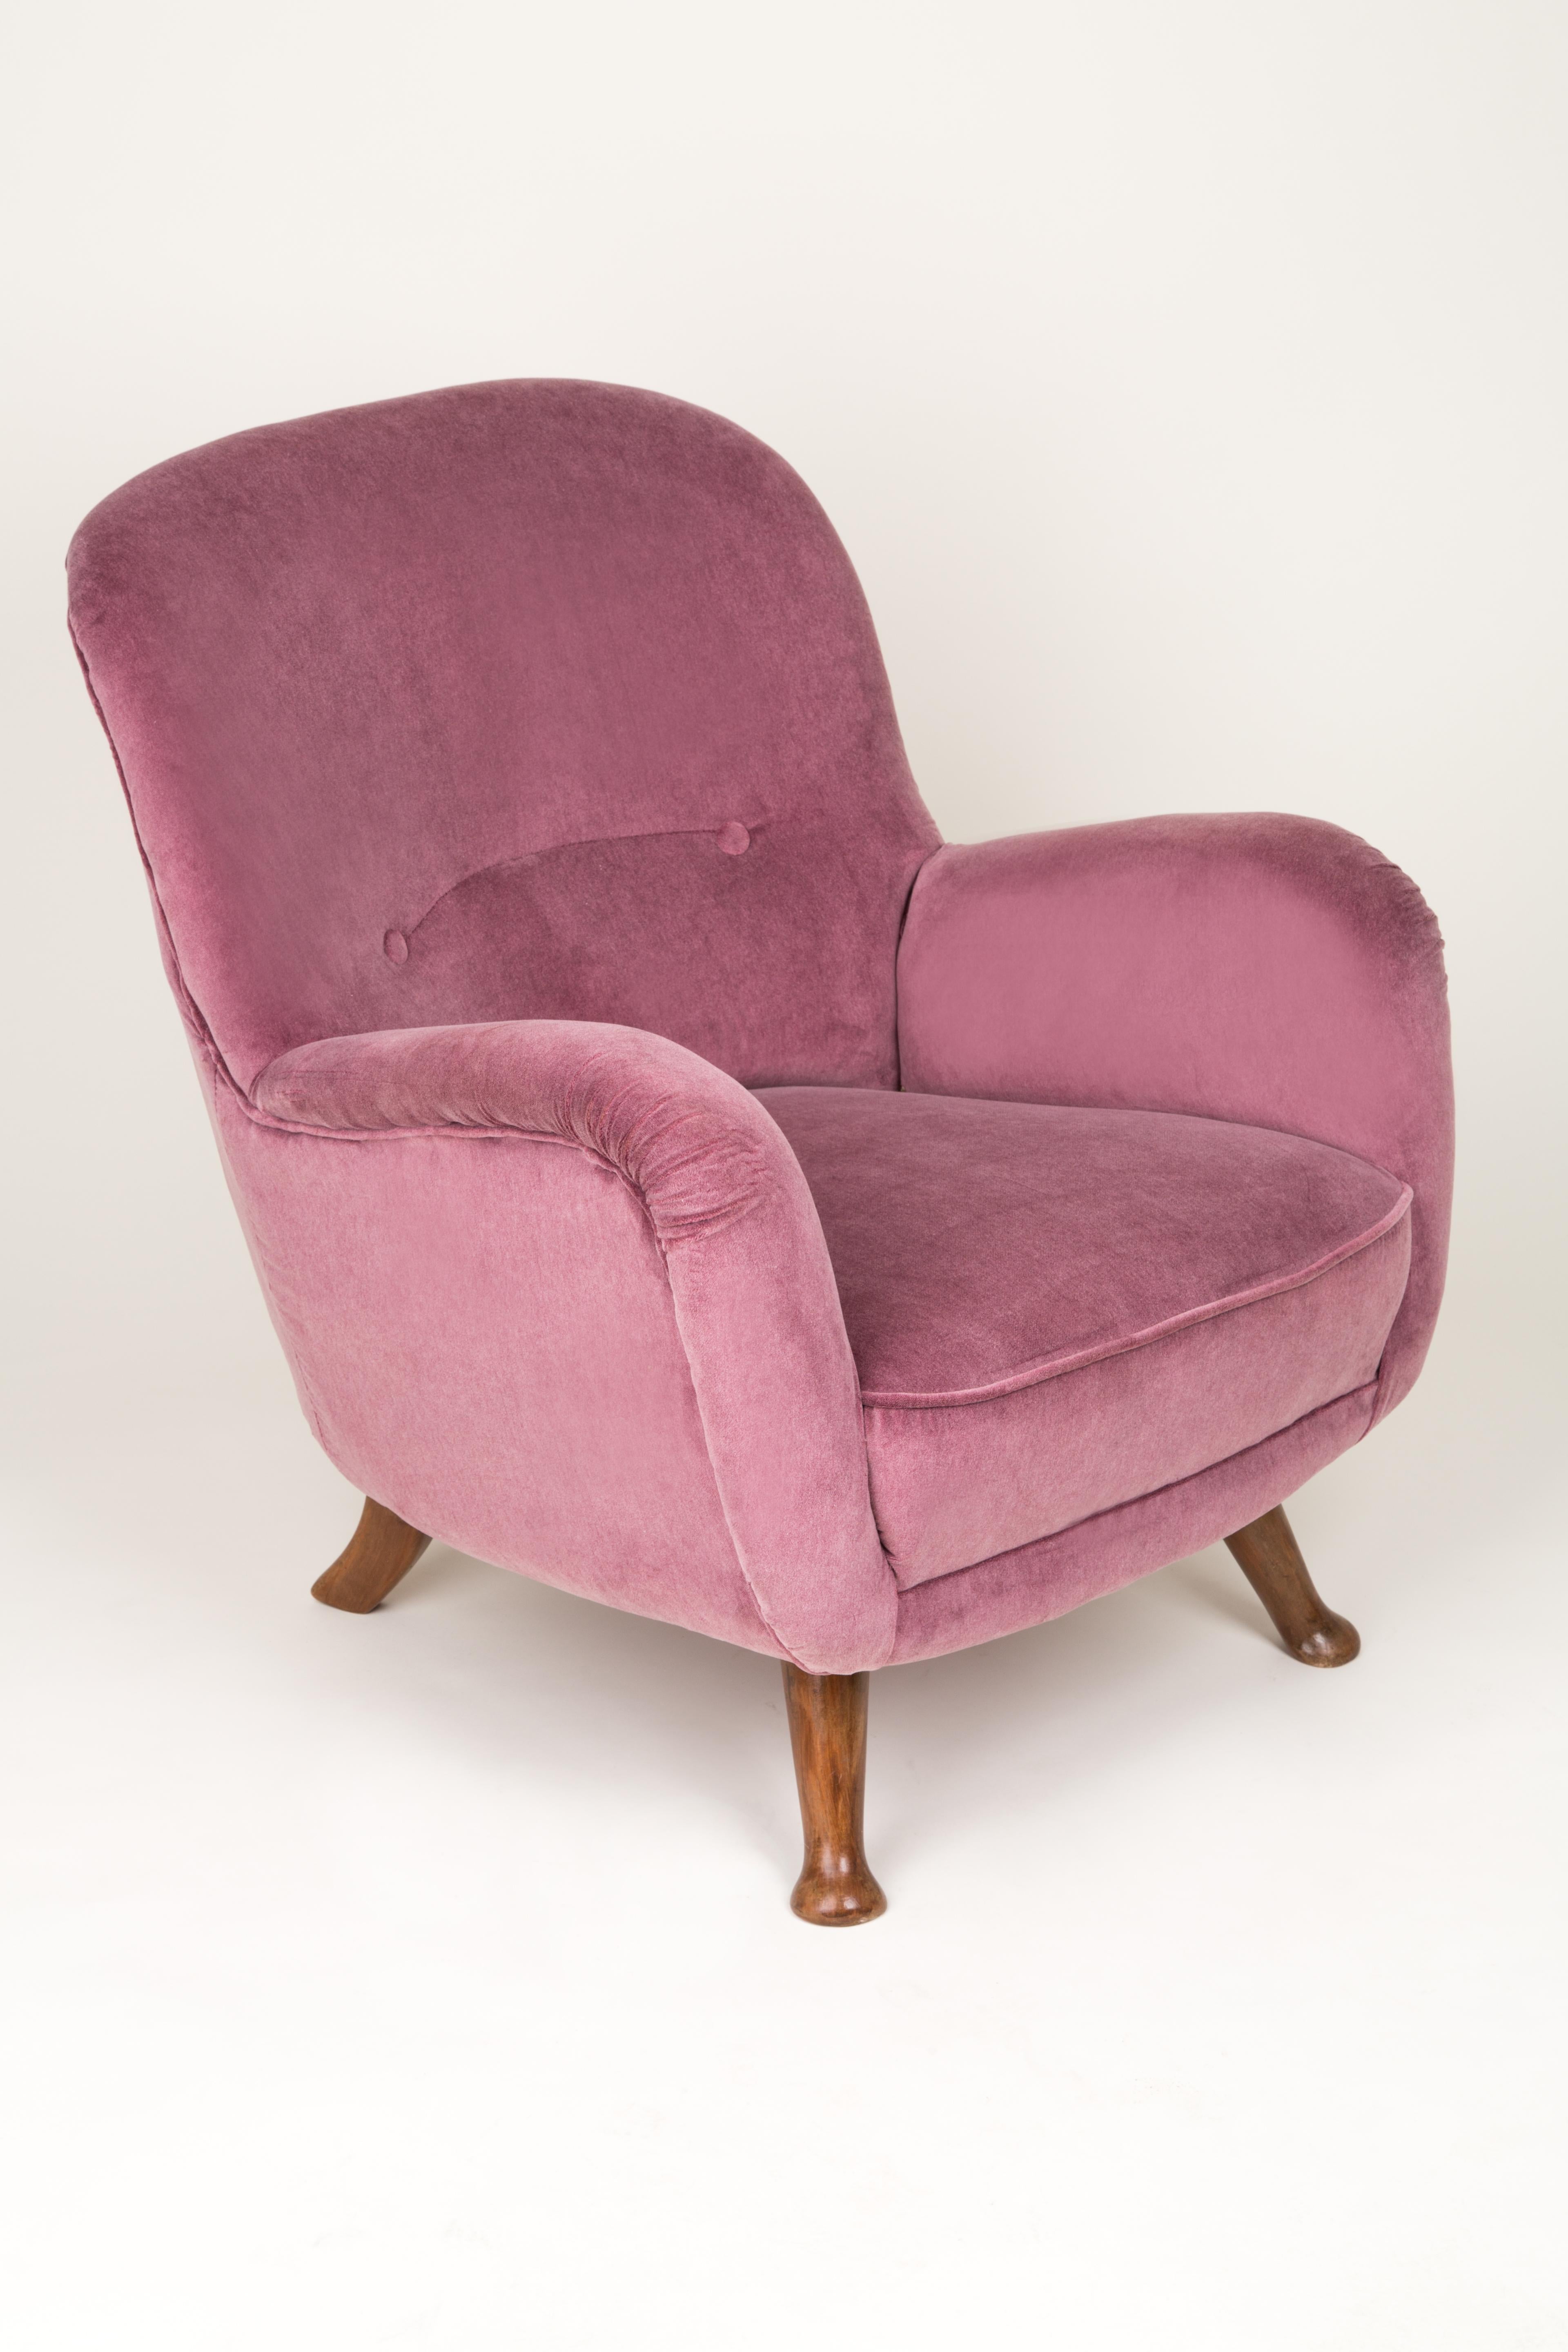 French Mid-Century Vintage Burgundy Big Armchair, Europe, 1960s For Sale